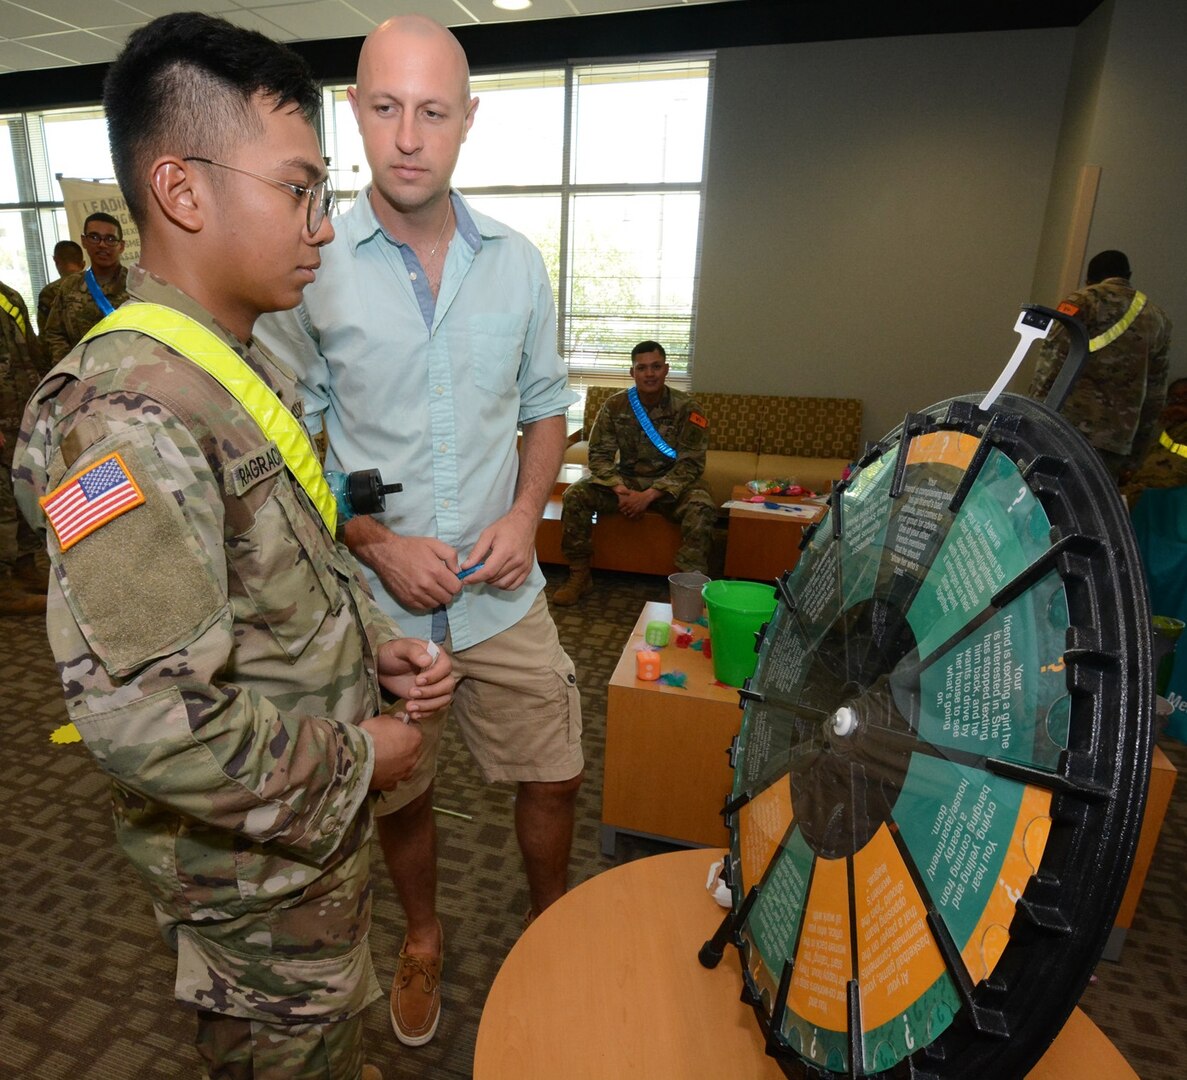 A Soldier spins the SHARP wheel that contains questions about the program.